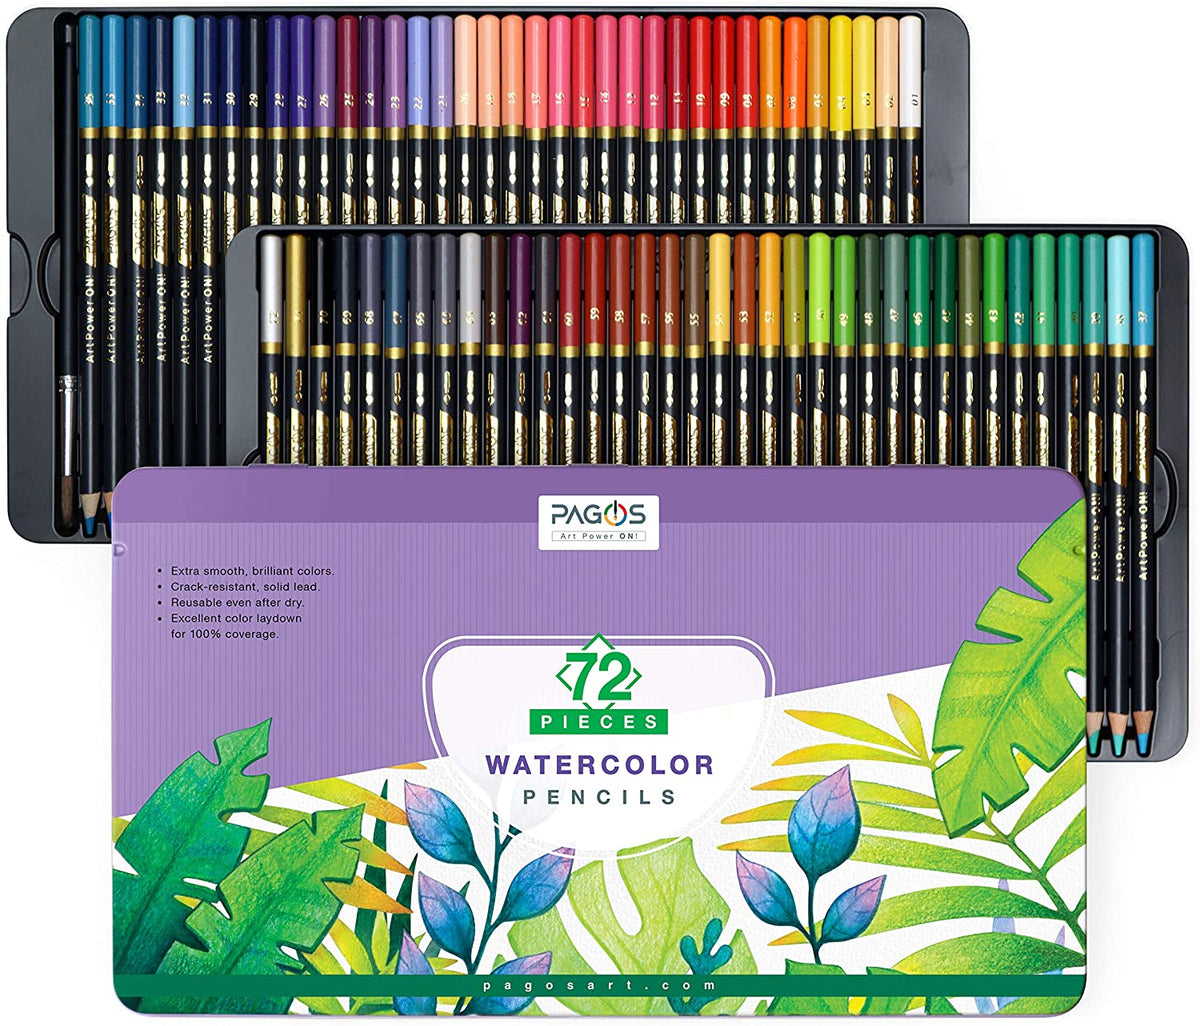 72 Water Color Pencils, Magicfly Water Soluble India